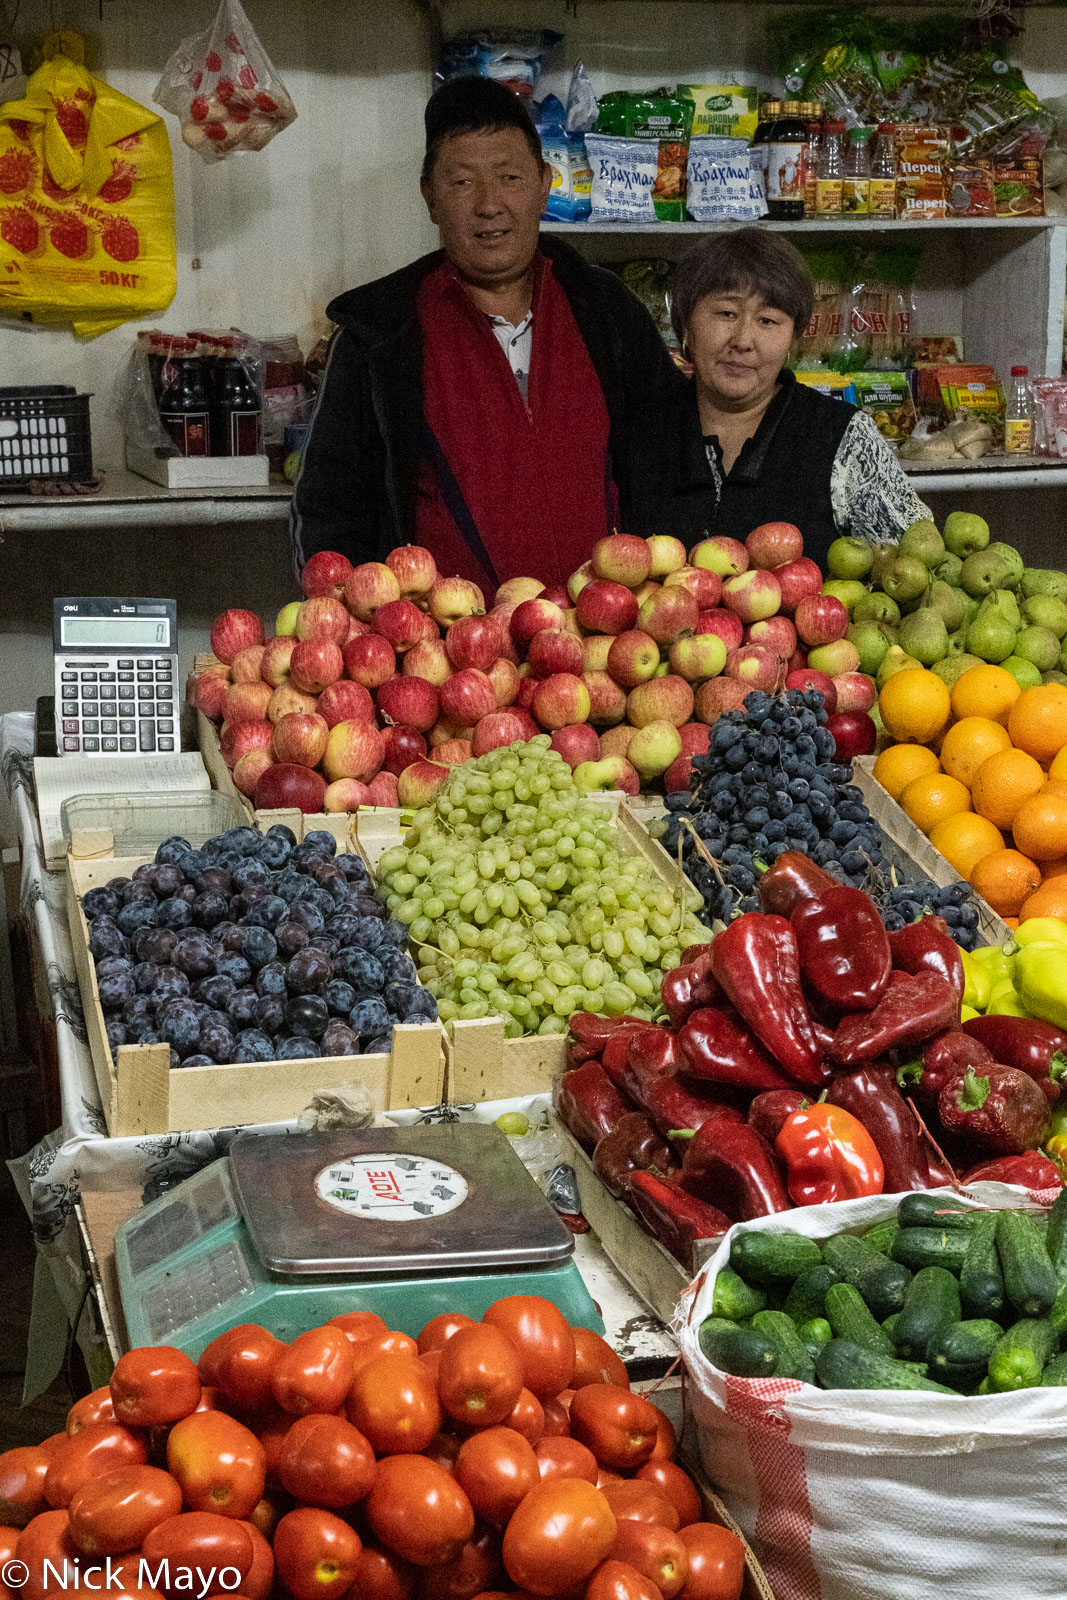 The owners with their vegetable and fruit stand in Naryn market.